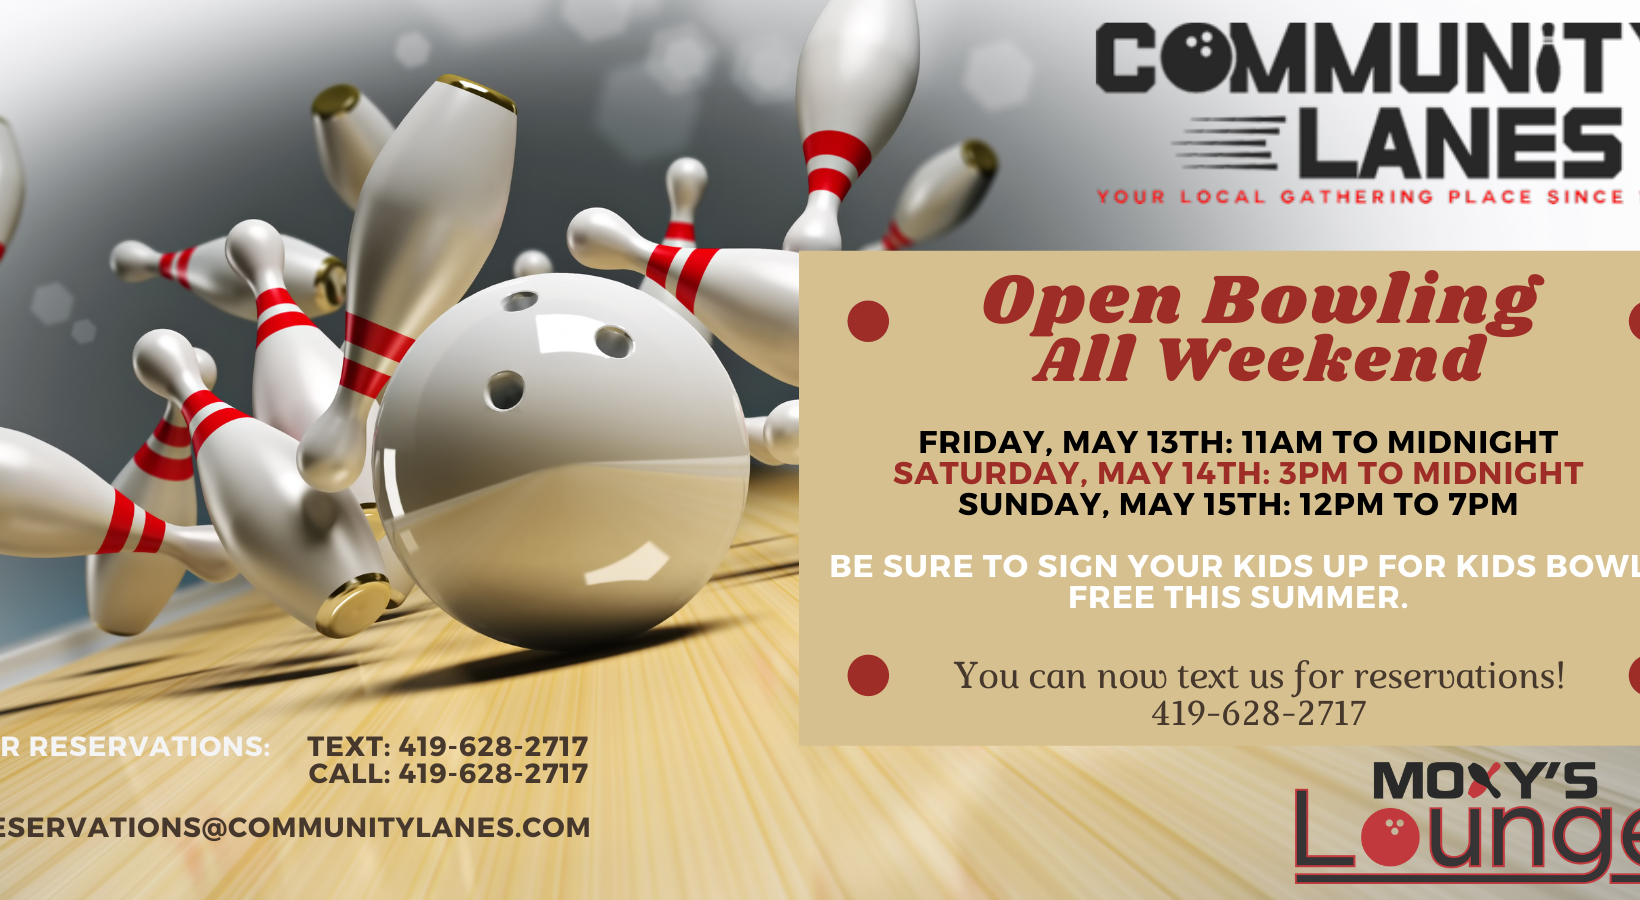 Open Bowling this weekend 5-13-2022